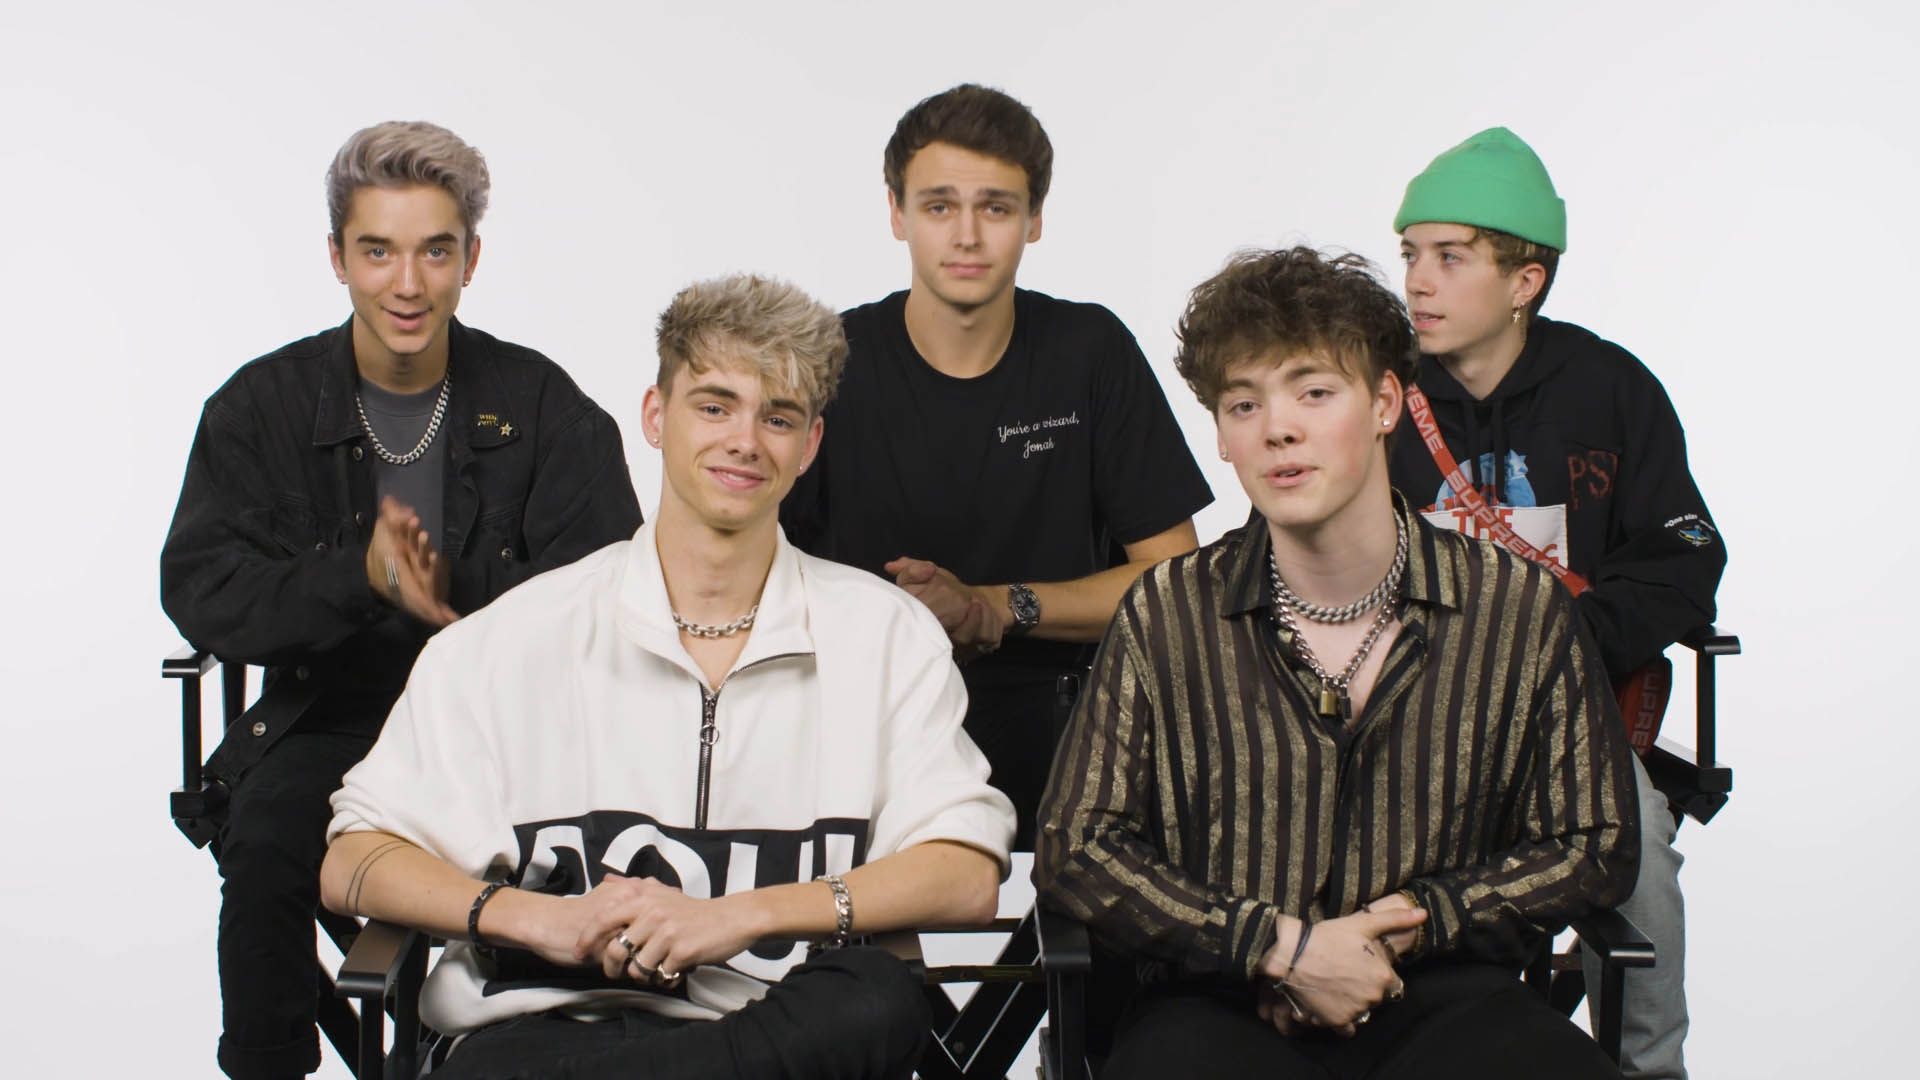 Why Don't We Facts - Why Don't We Tour